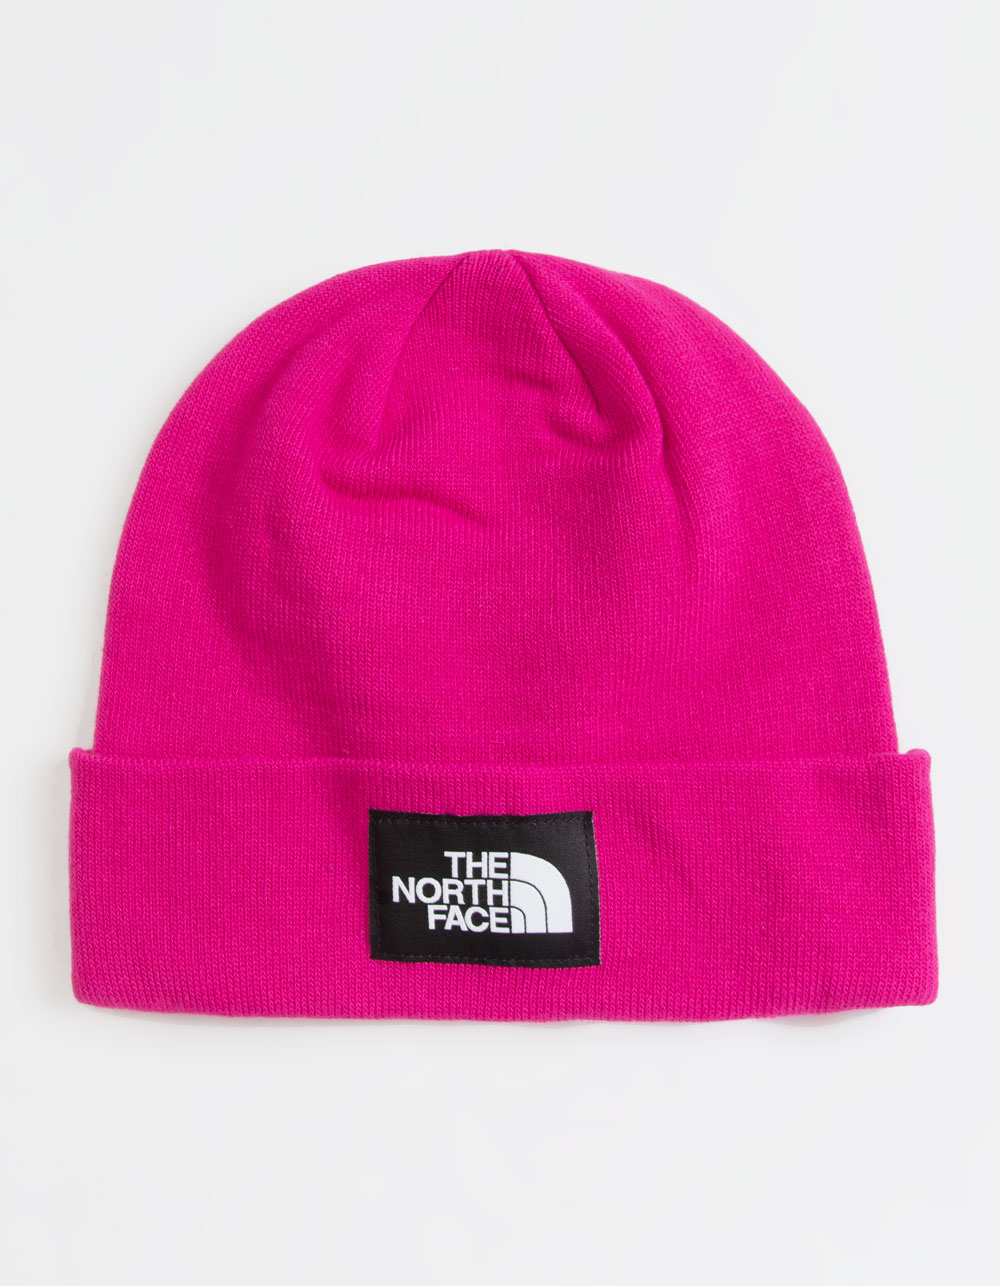 THE NORTH FACE Dock Worker Recycled Beanie - PINK | Tillys